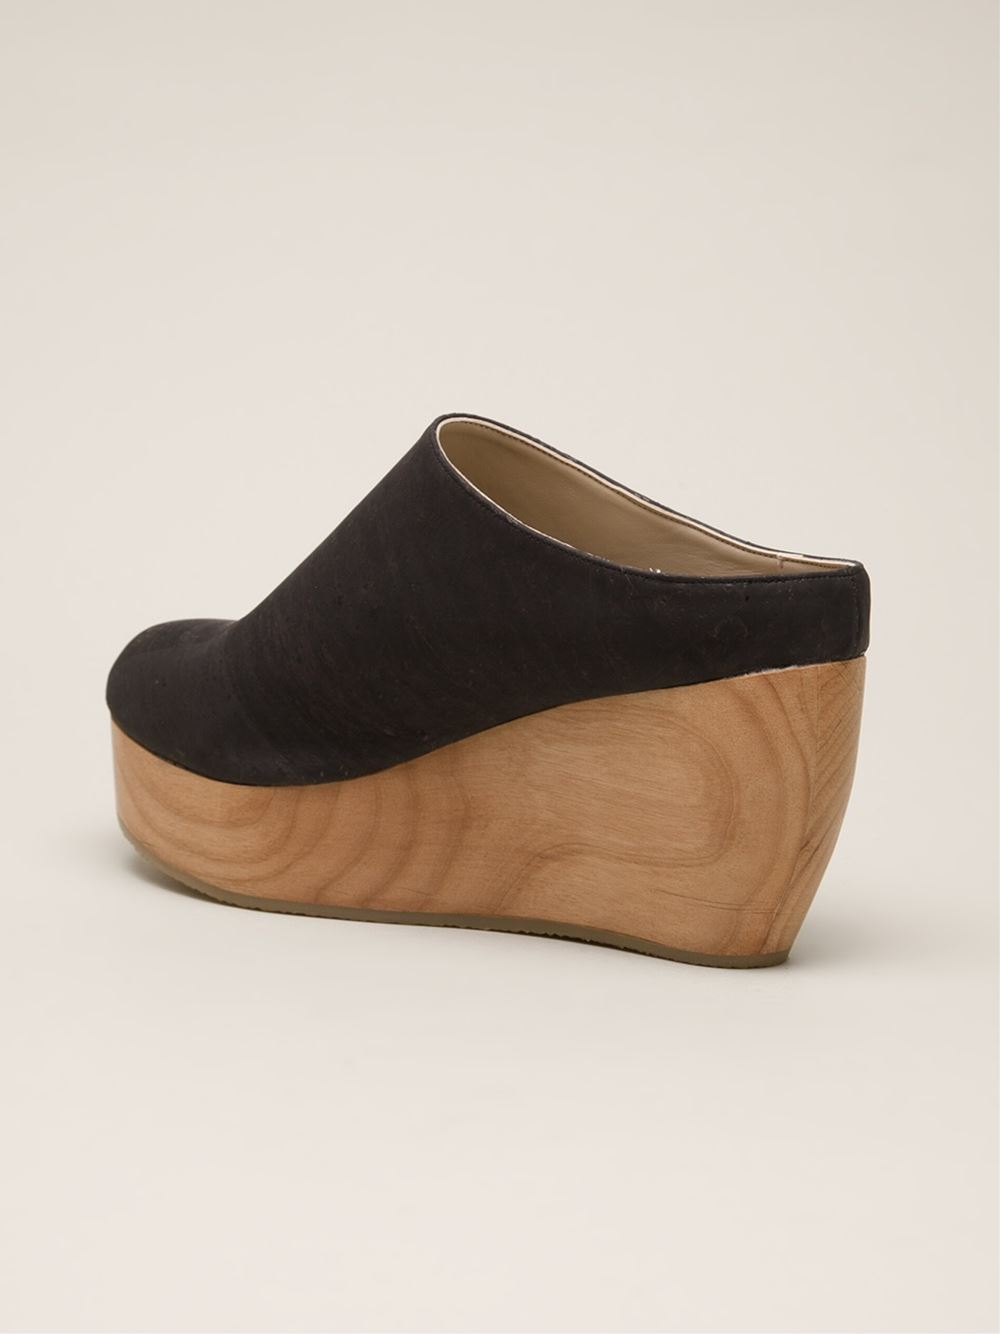 wedge clogs outlet online 7f054 f990c